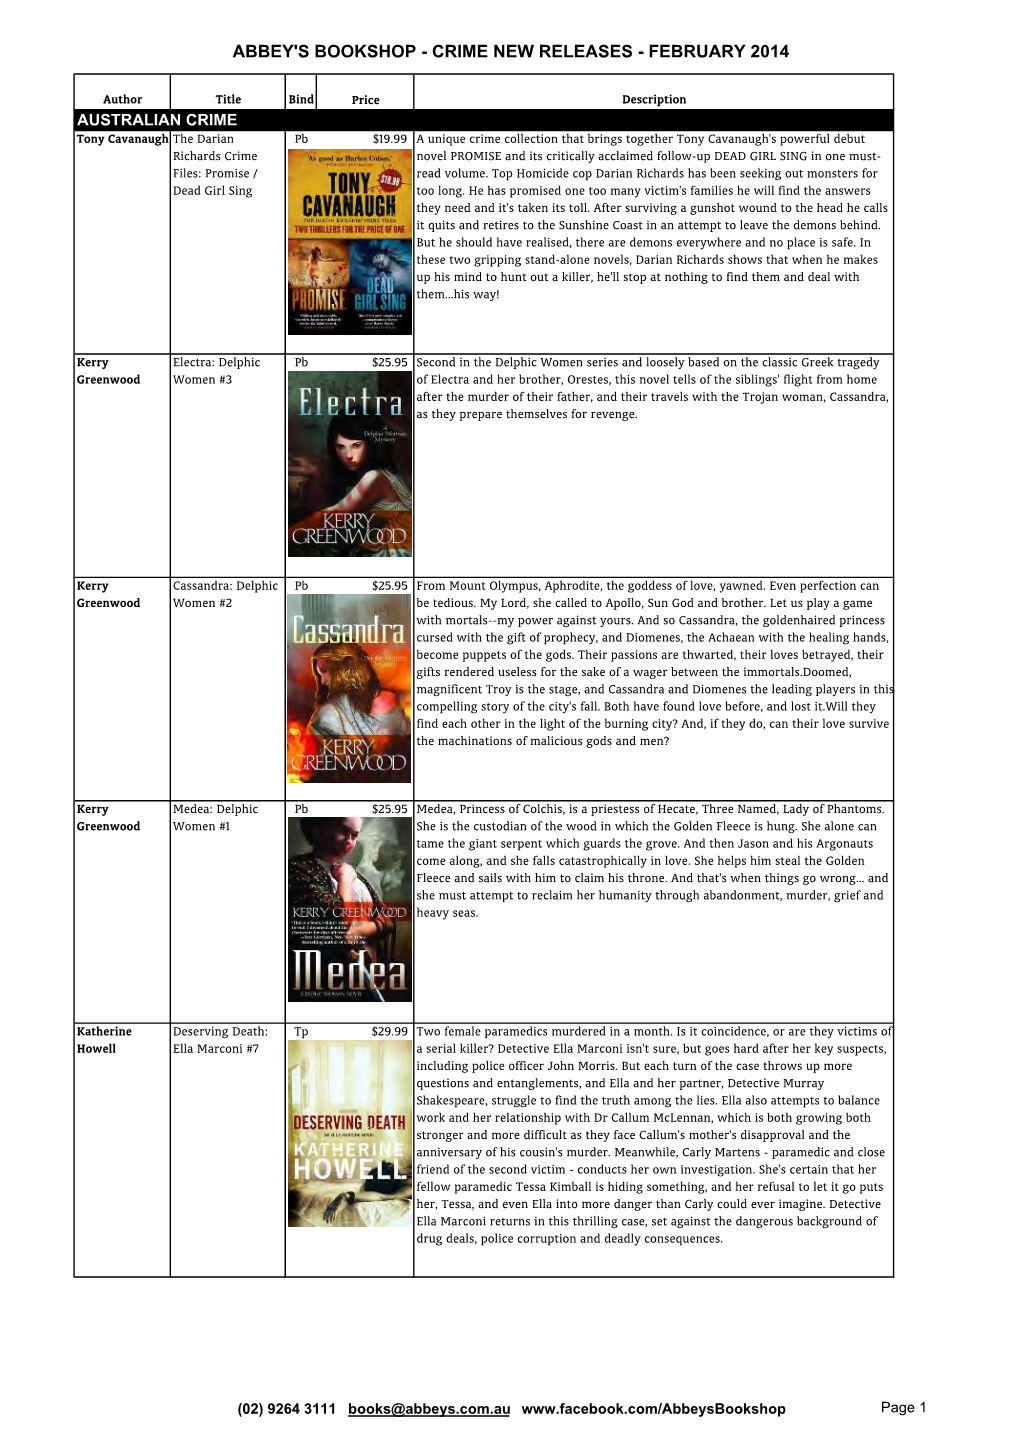 Crime New Releases - February 2014